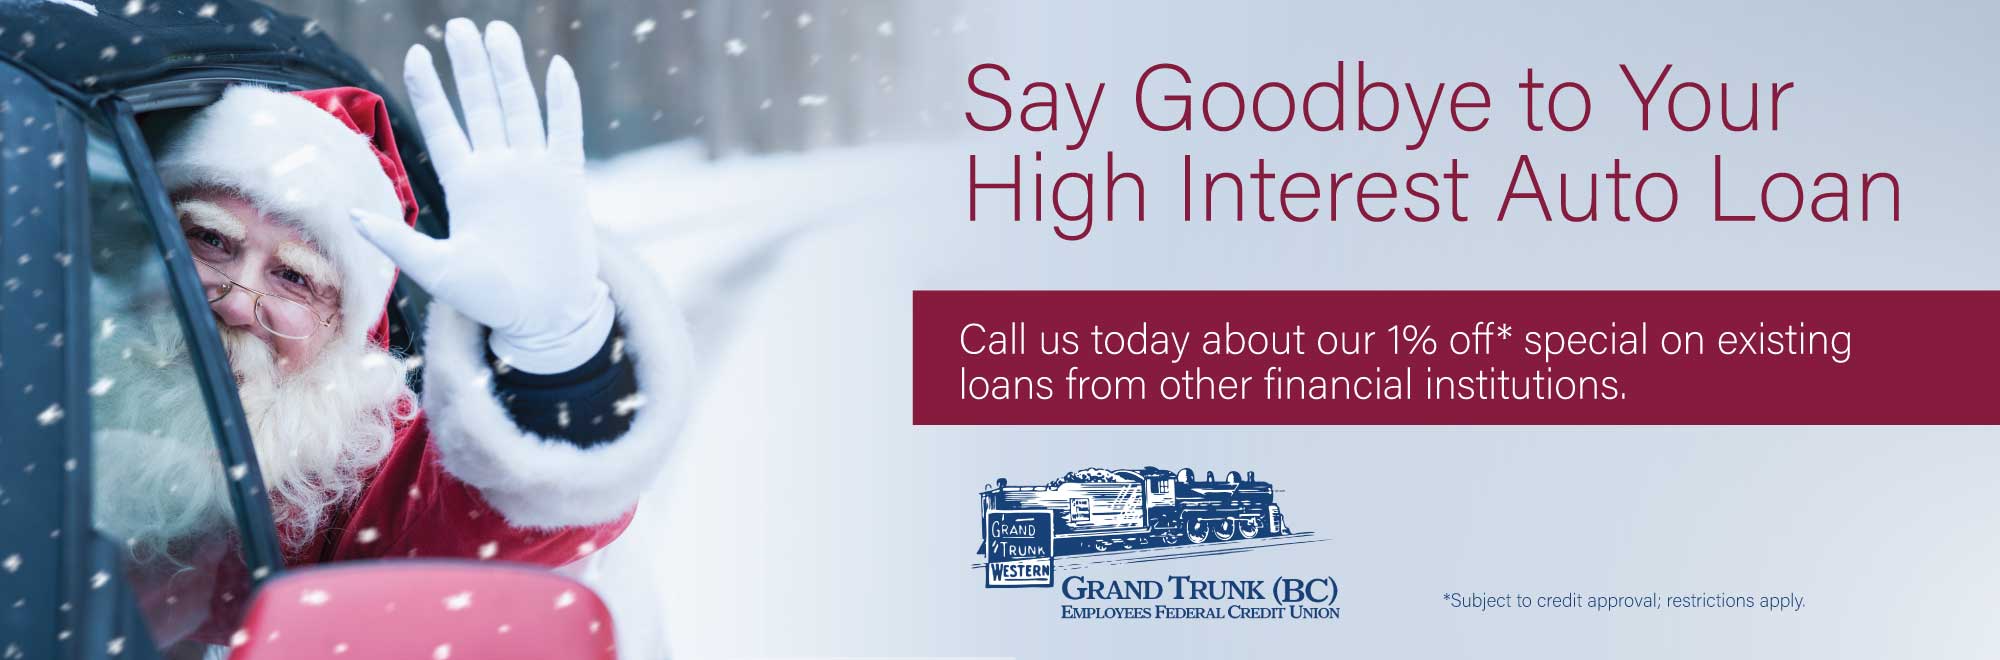 Say Goodbye to Your High Interest Auto Loan. Call us today about our 1% off* special on existing loans from other financial institutions. *Subject to credit approval; restrictions apply.